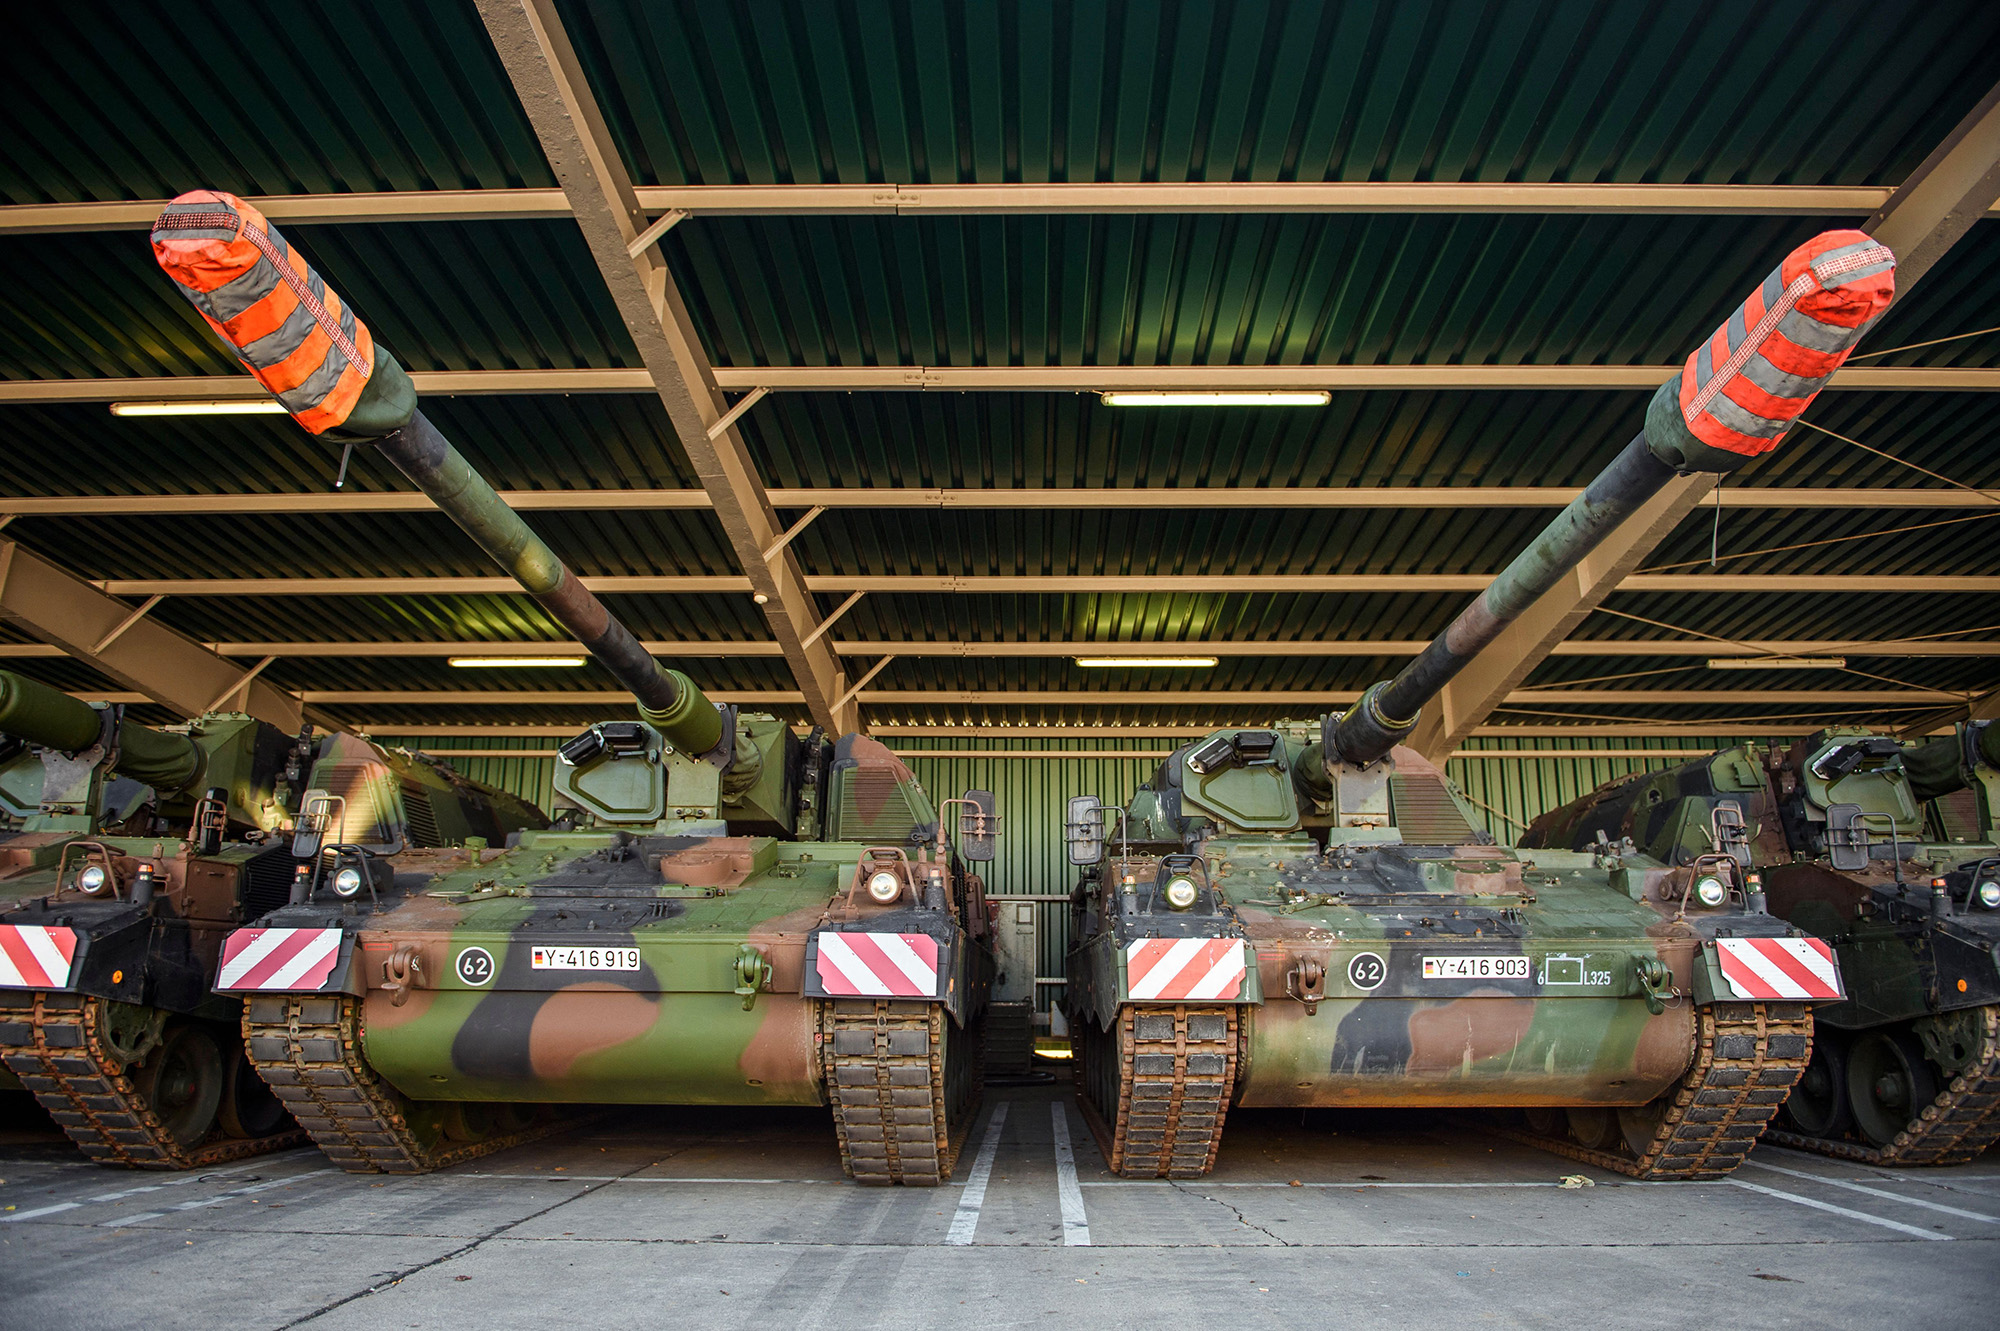 Mounted howitzers, Panzerhaubitze 2000, of the German Bundeswehr stand at the Hindenburg barracks in Munster, Germany, on February 14.